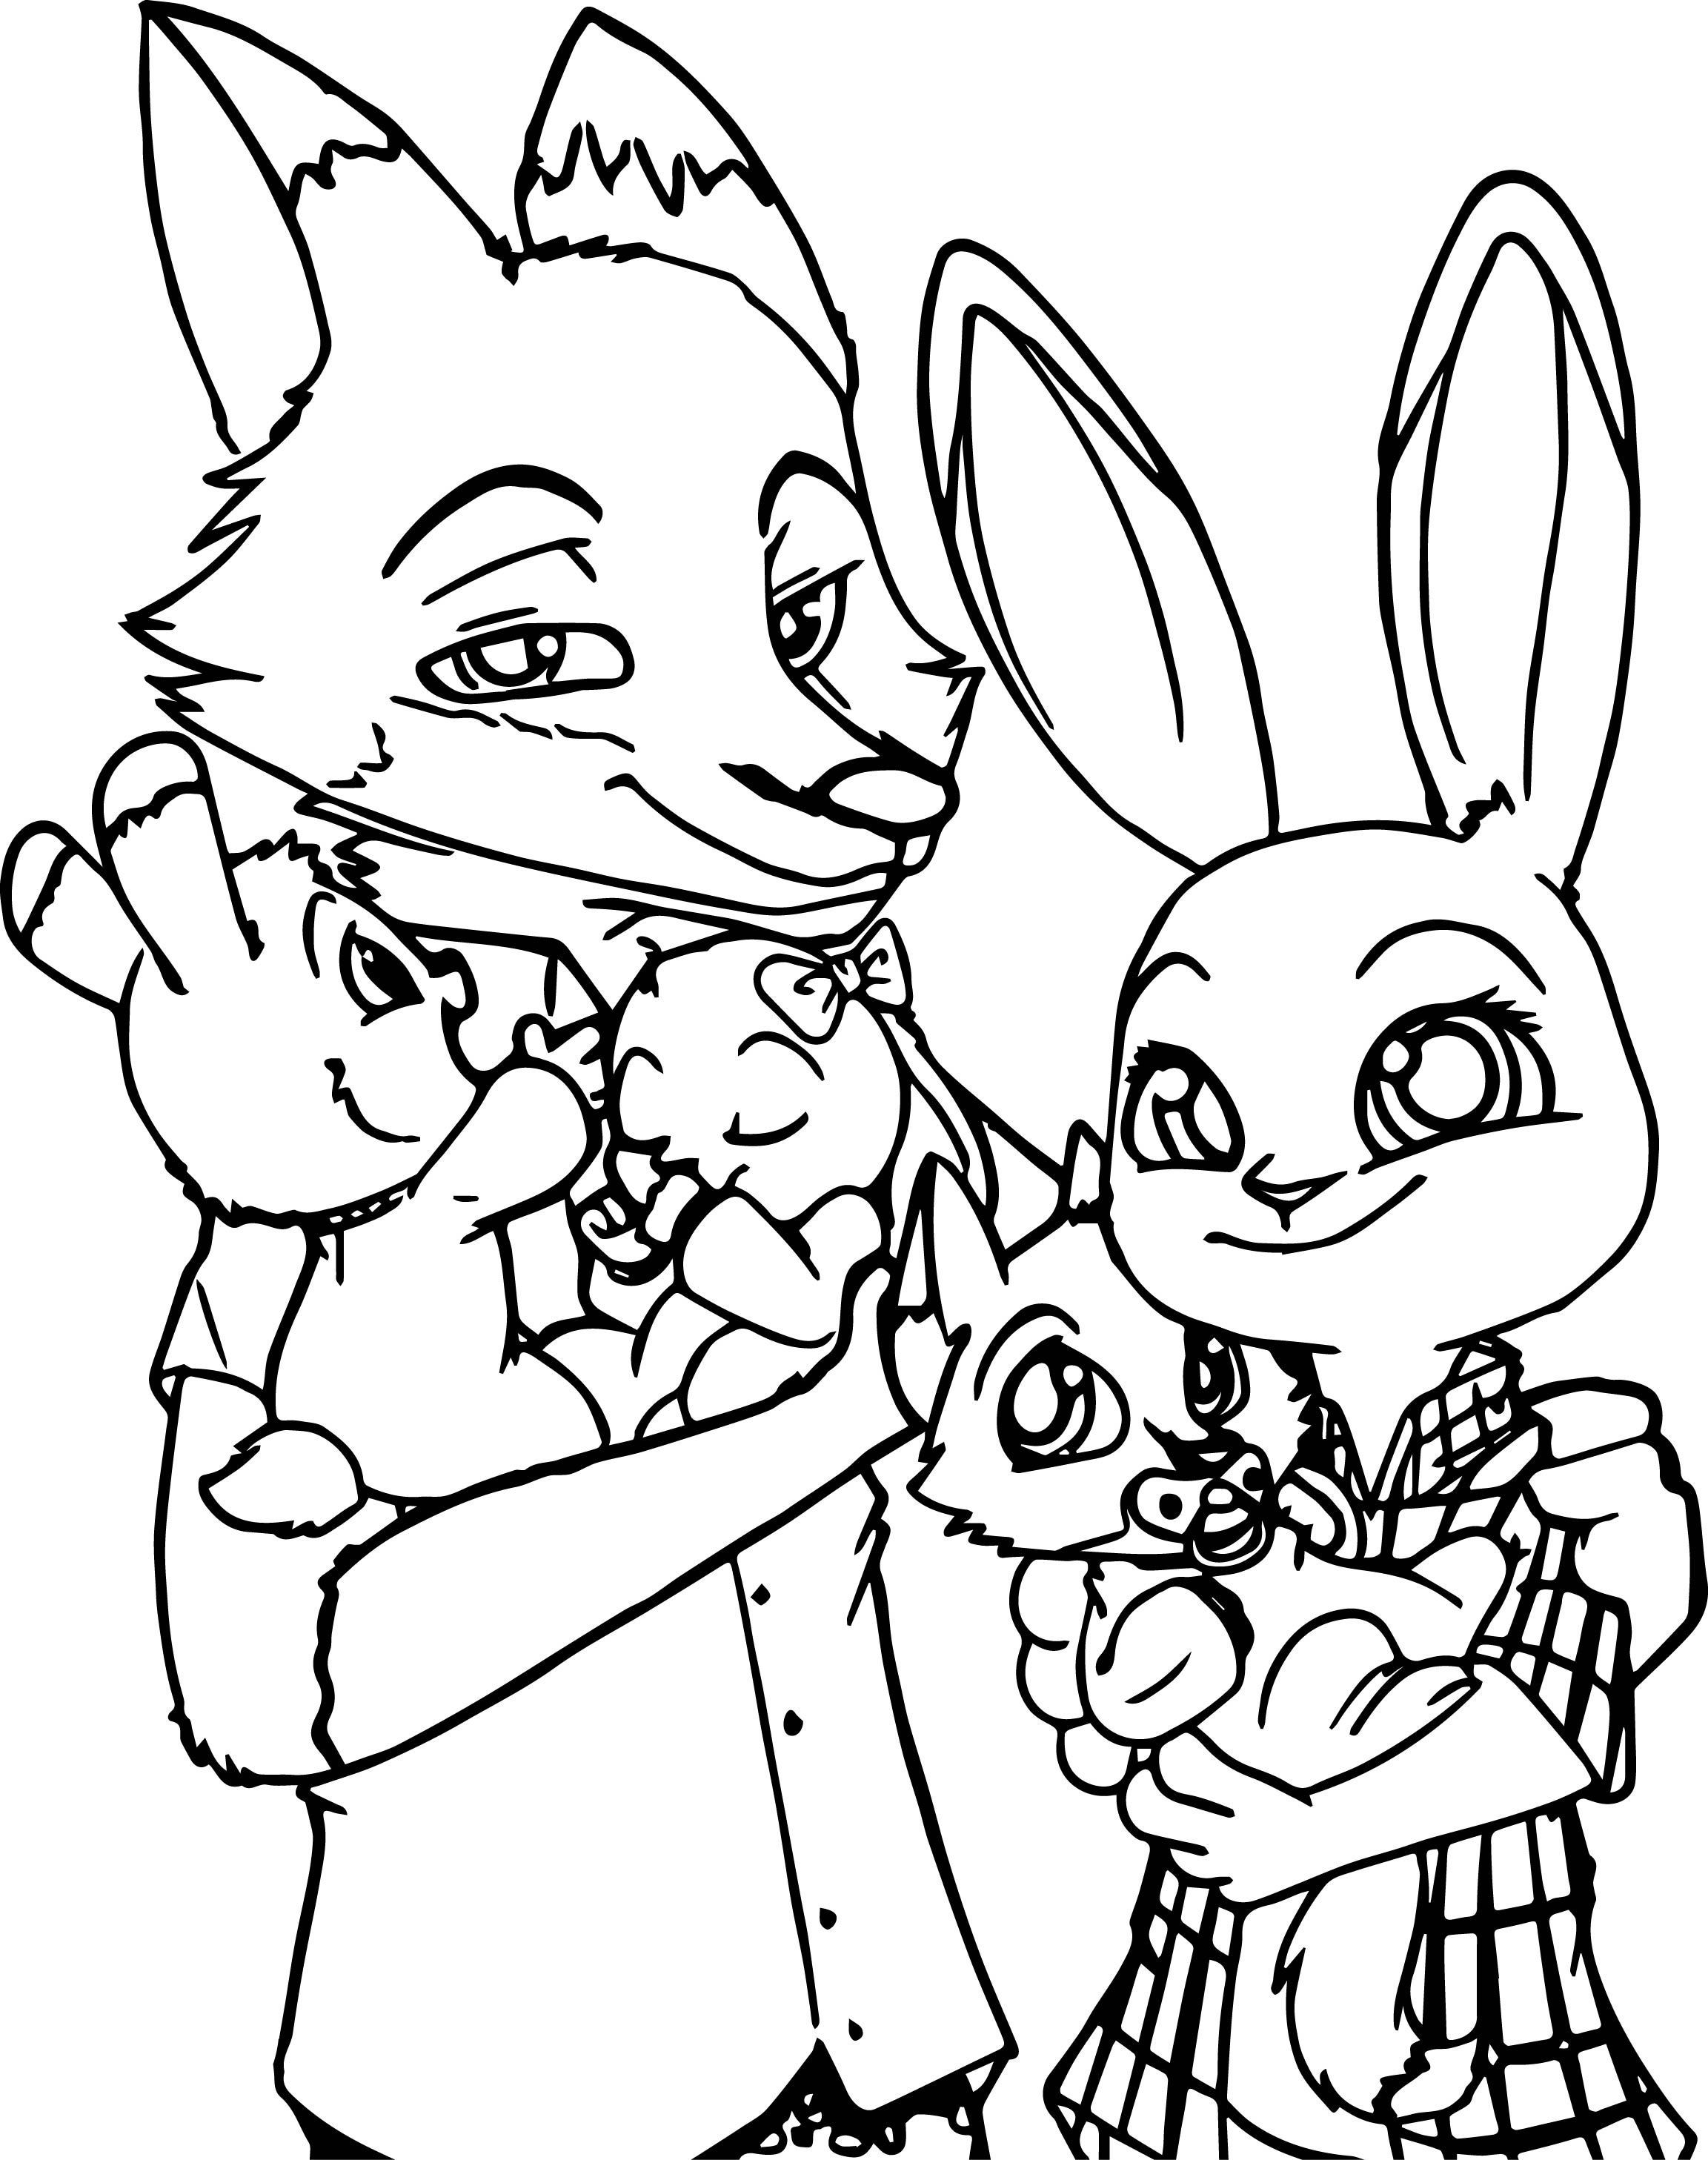 Cartoon Fox Coloring Pages at GetColorings.com | Free ...